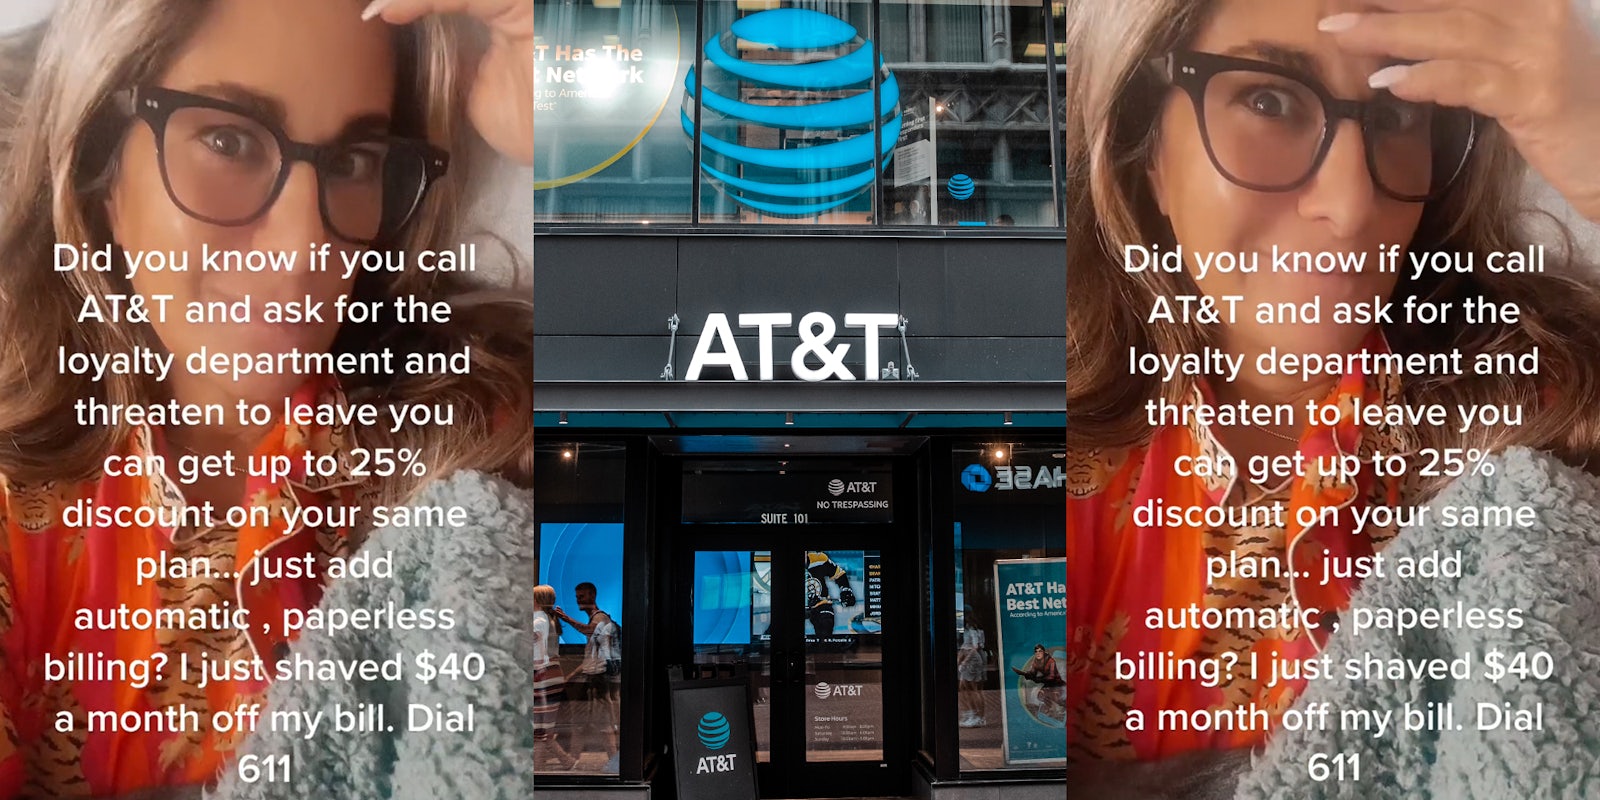 woman with caption 'Did you know if you call AT&T and ask for the loyalty department and threaten to leave you can get up to 25% discount on your same plan... just add automatic, paperless billing? I just saved $40 a month off my bill. Dial 611' (l) AT&T sign on building (c) woman with caption 'Did you know if you call AT&T and ask for the loyalty department and threaten to leave you can get up to 25% discount on your same plan... just add automatic, paperless billing? I just saved $40 a month off my bill. Dial 611' (r)